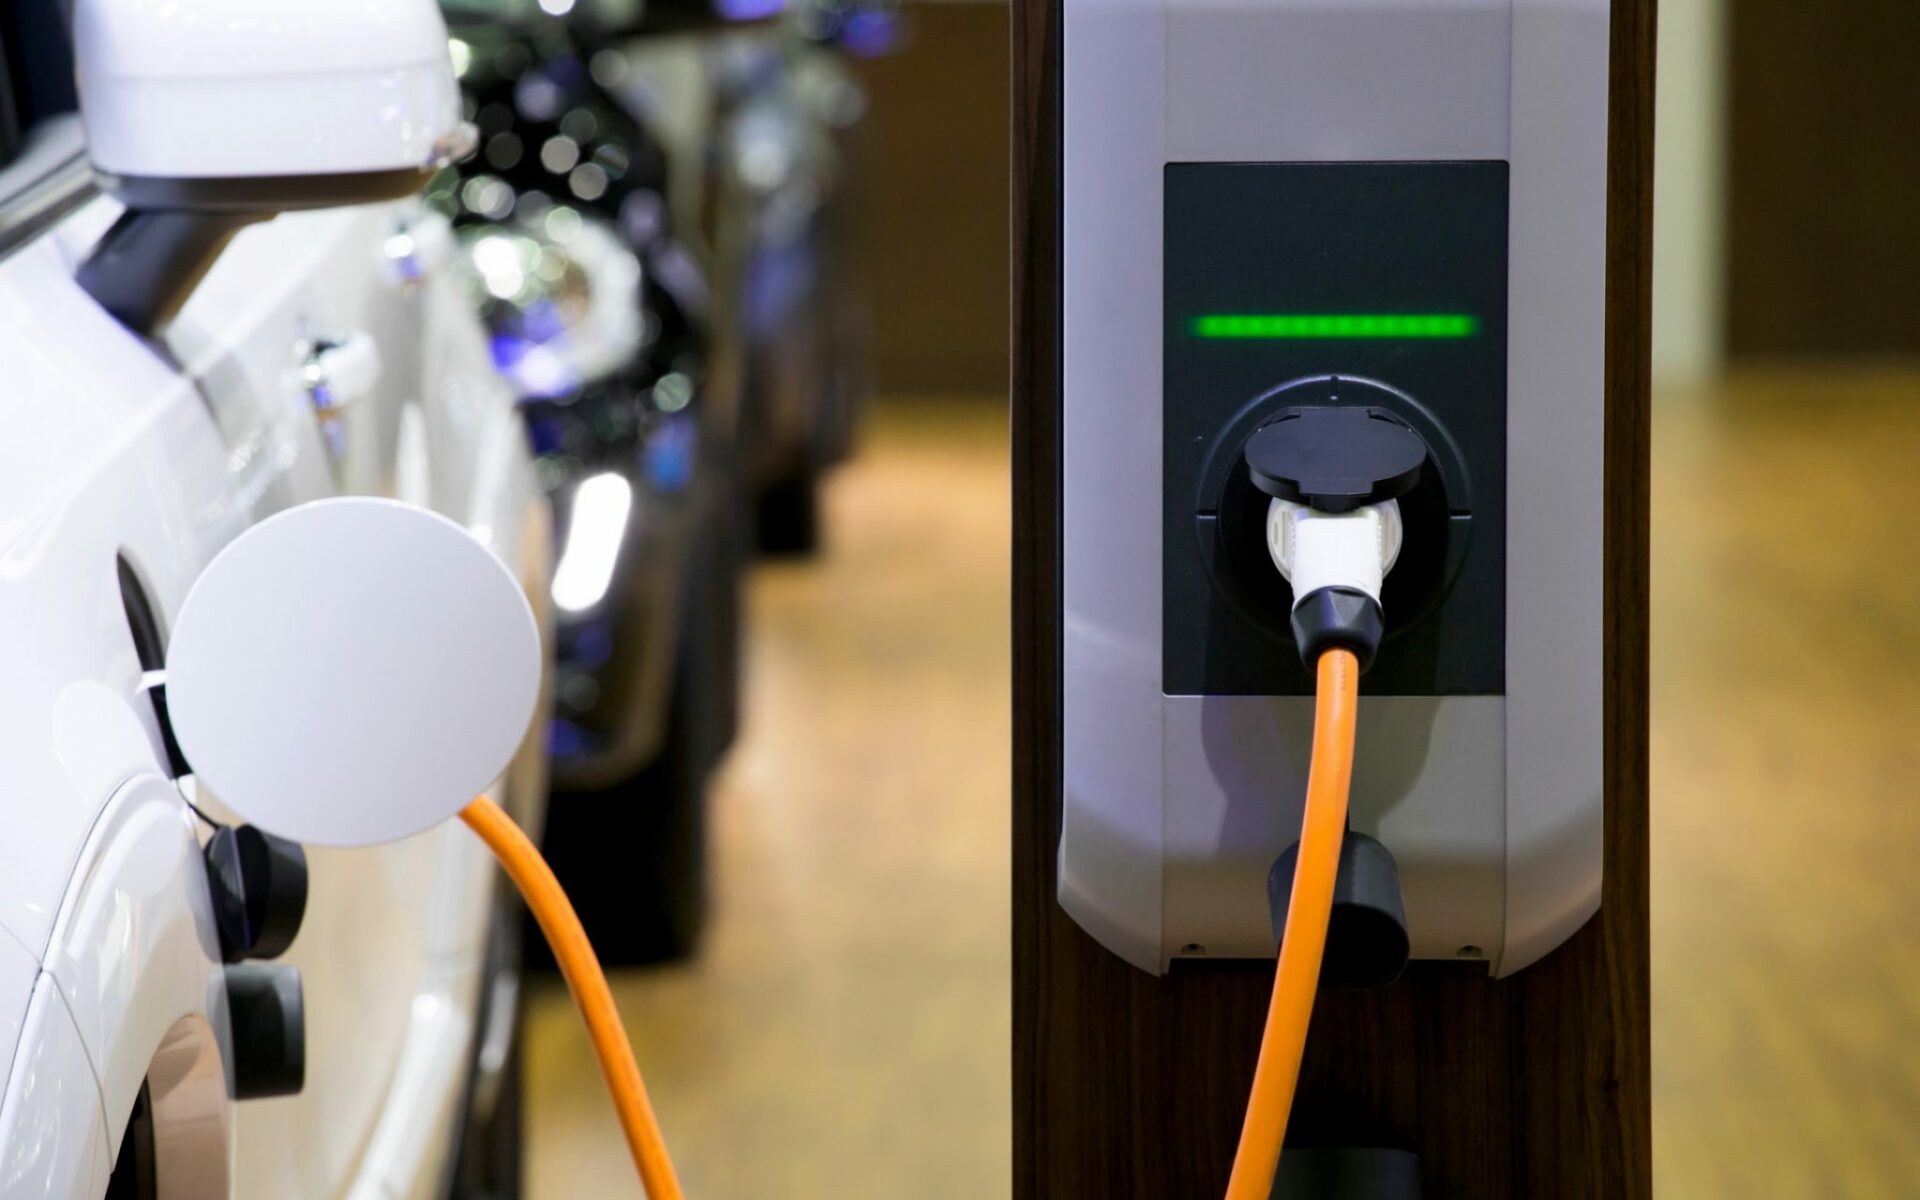 New Guidelines Allow Private Charging of Electric Vehicles